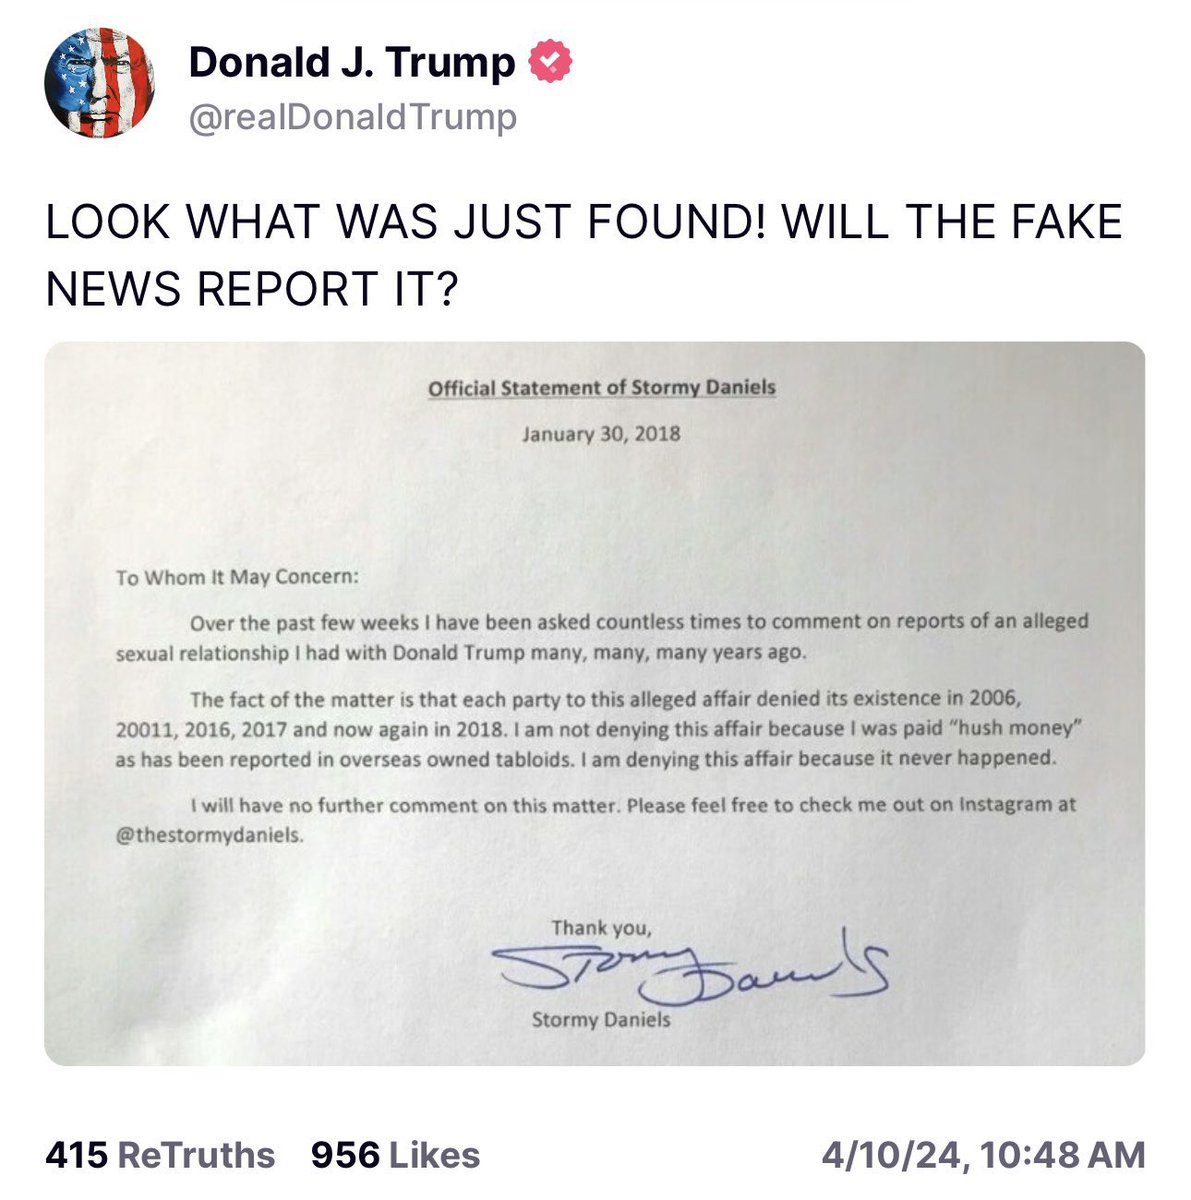 Since the judge made @realDonaldTrump take this letter down showing Stormy Daniels is a fraud and the whole case should be thrown out, I’m posting again to keep it in the news. Please bookmark, take this pic and spread all over social media. The TRUTH will not be silenced!!!!